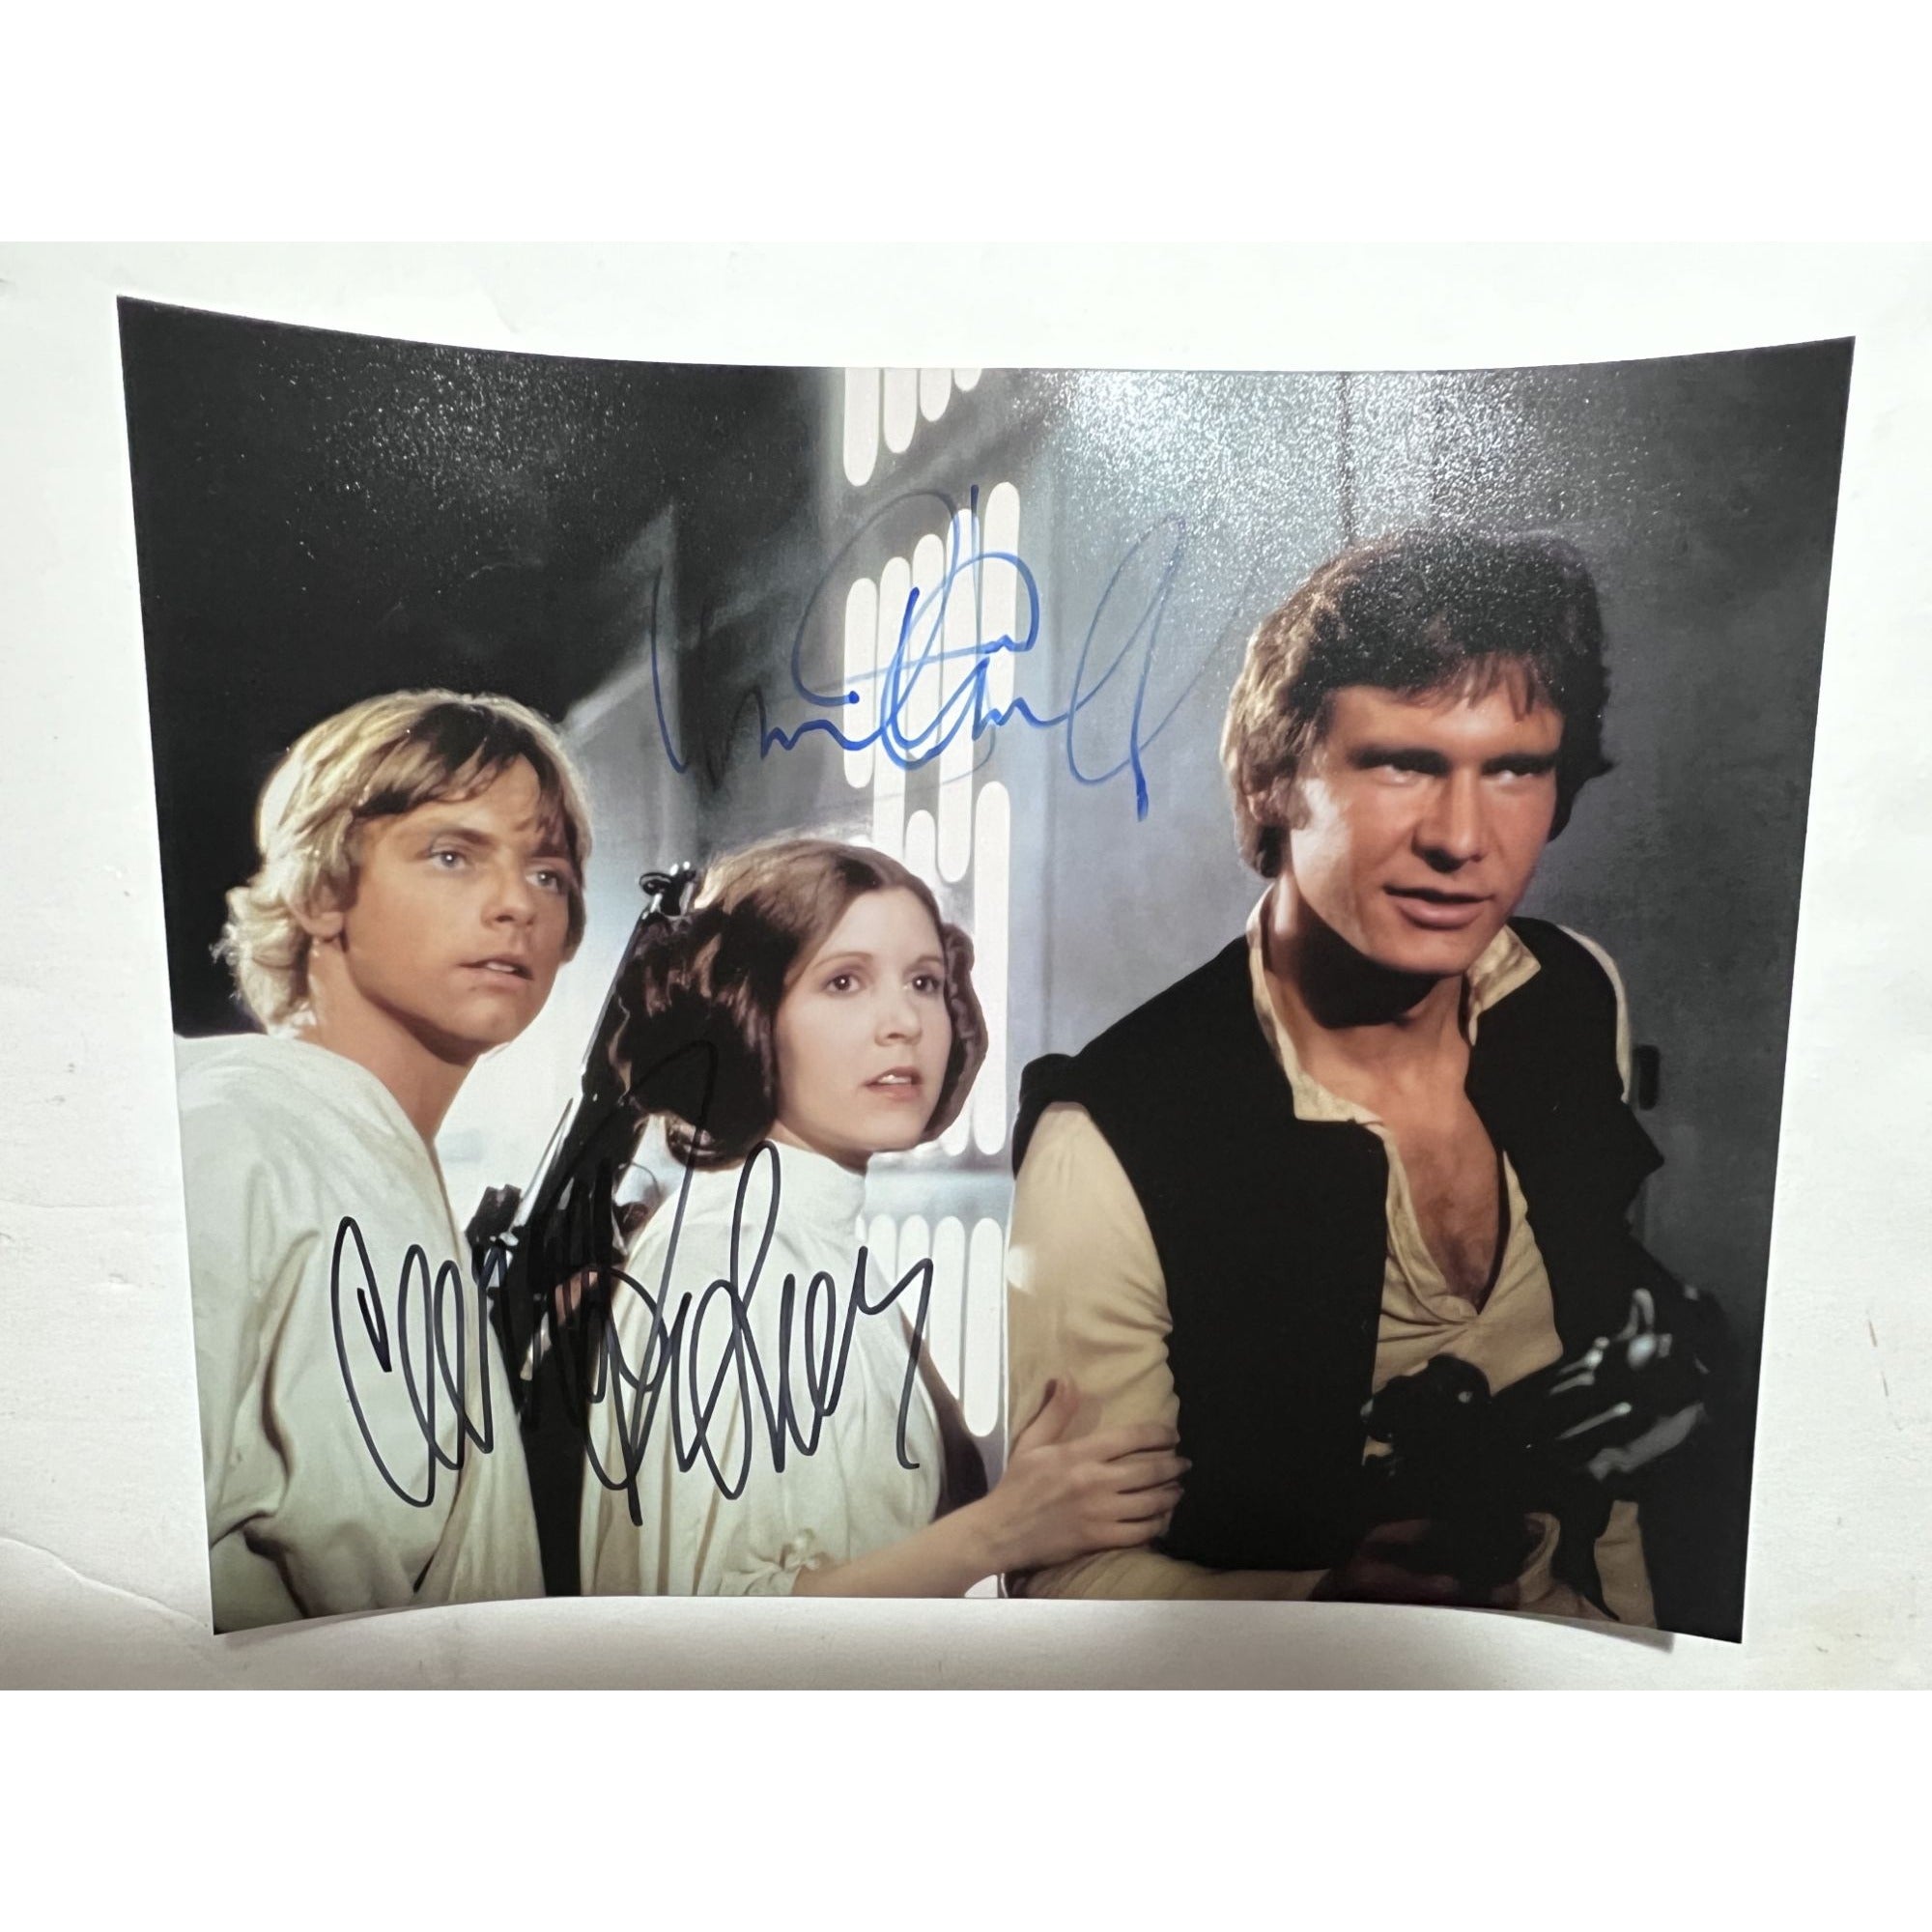 Star Wars Harrison Ford Mark Hamill Carrie Fisher 8x10 photo signed with proof